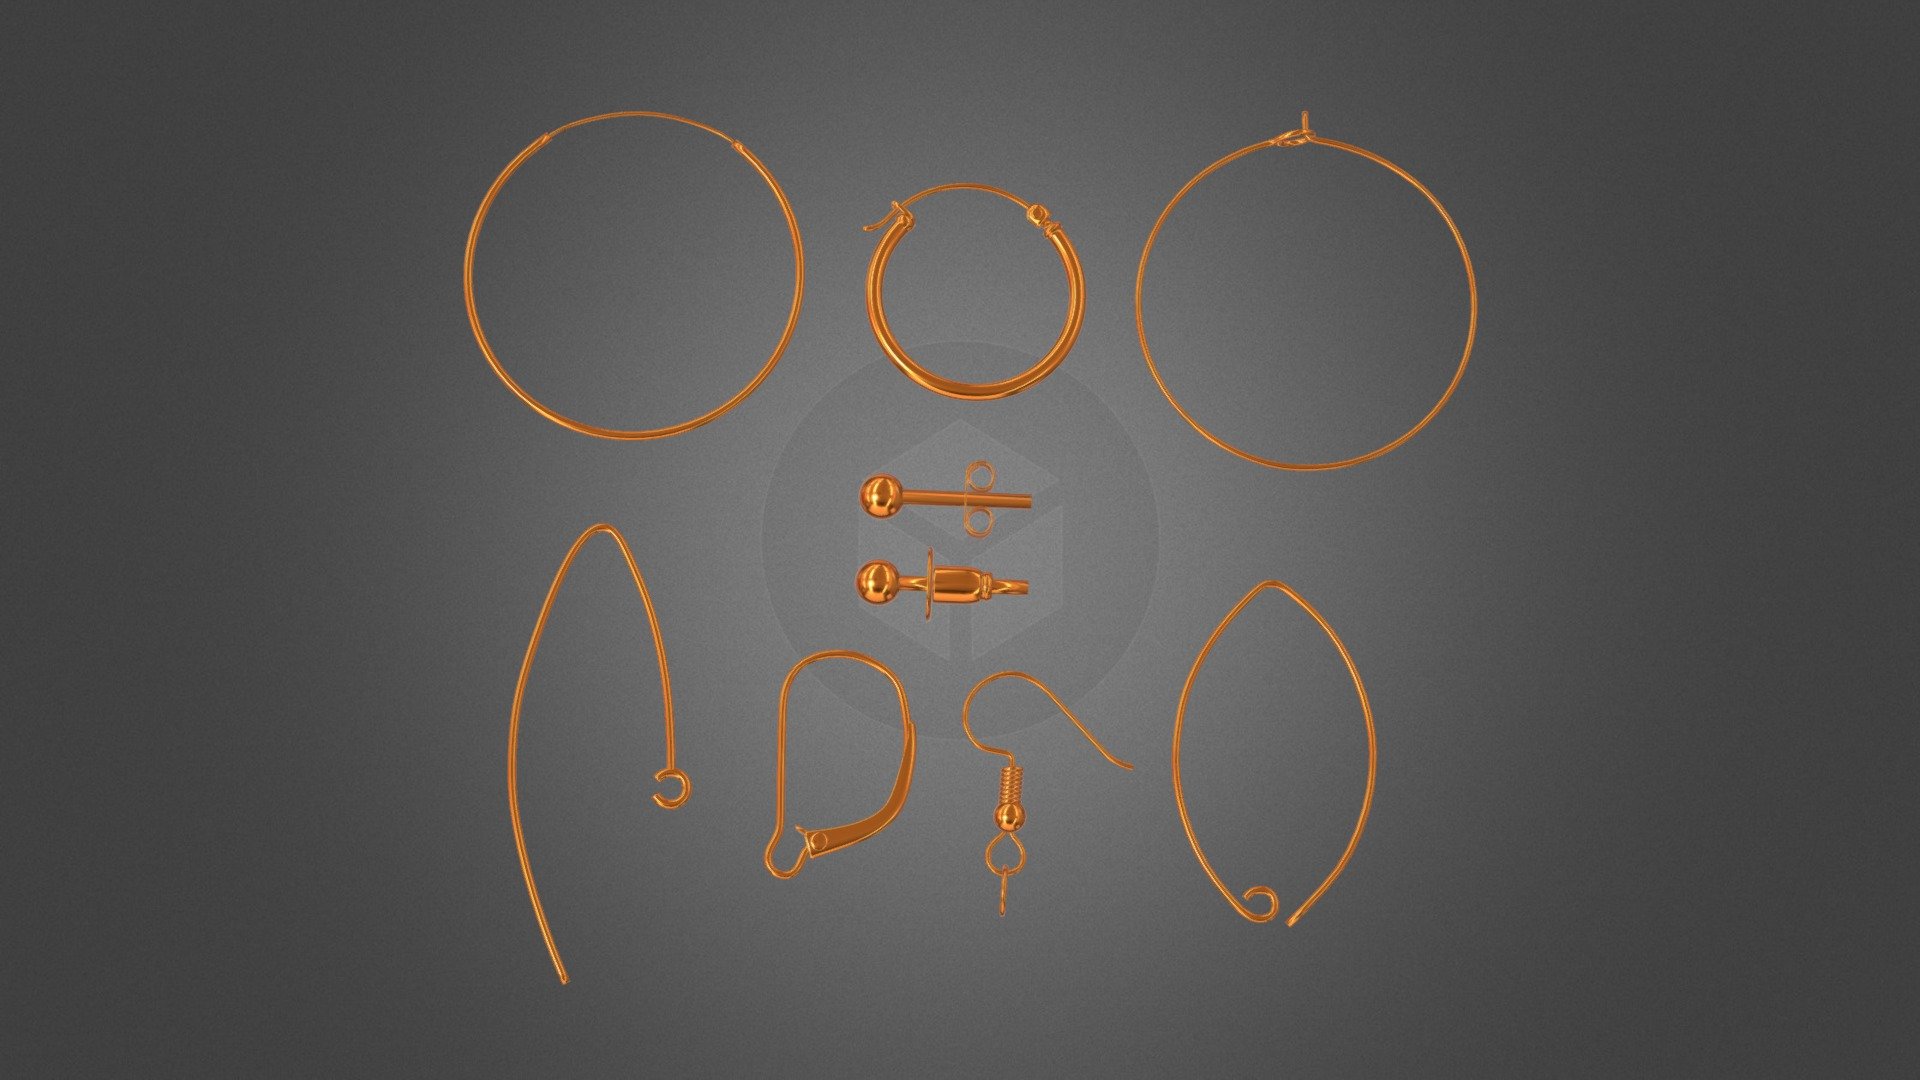 Sample models of Earring &amp; Jewelry Findings and Hinges. 
Set: french hook, endless-hoops, marquise, leverback,  stud, hinged hoop.
Tip: If desired, the number of polygons can be reduced

Zip contains:

1 .max (2016)

1 .blend (2.8)

1 .fbx

1 .obj

1 .gltf 2.0

The author hopes to your creativity.

P.S. This model was created in software &lsquo;Blender 3D' with GNU General Public License (GPL, or free software) - Earring & Jewelry Findings and Hinges - 3D model by Vitamin (@btrseller) 3d model